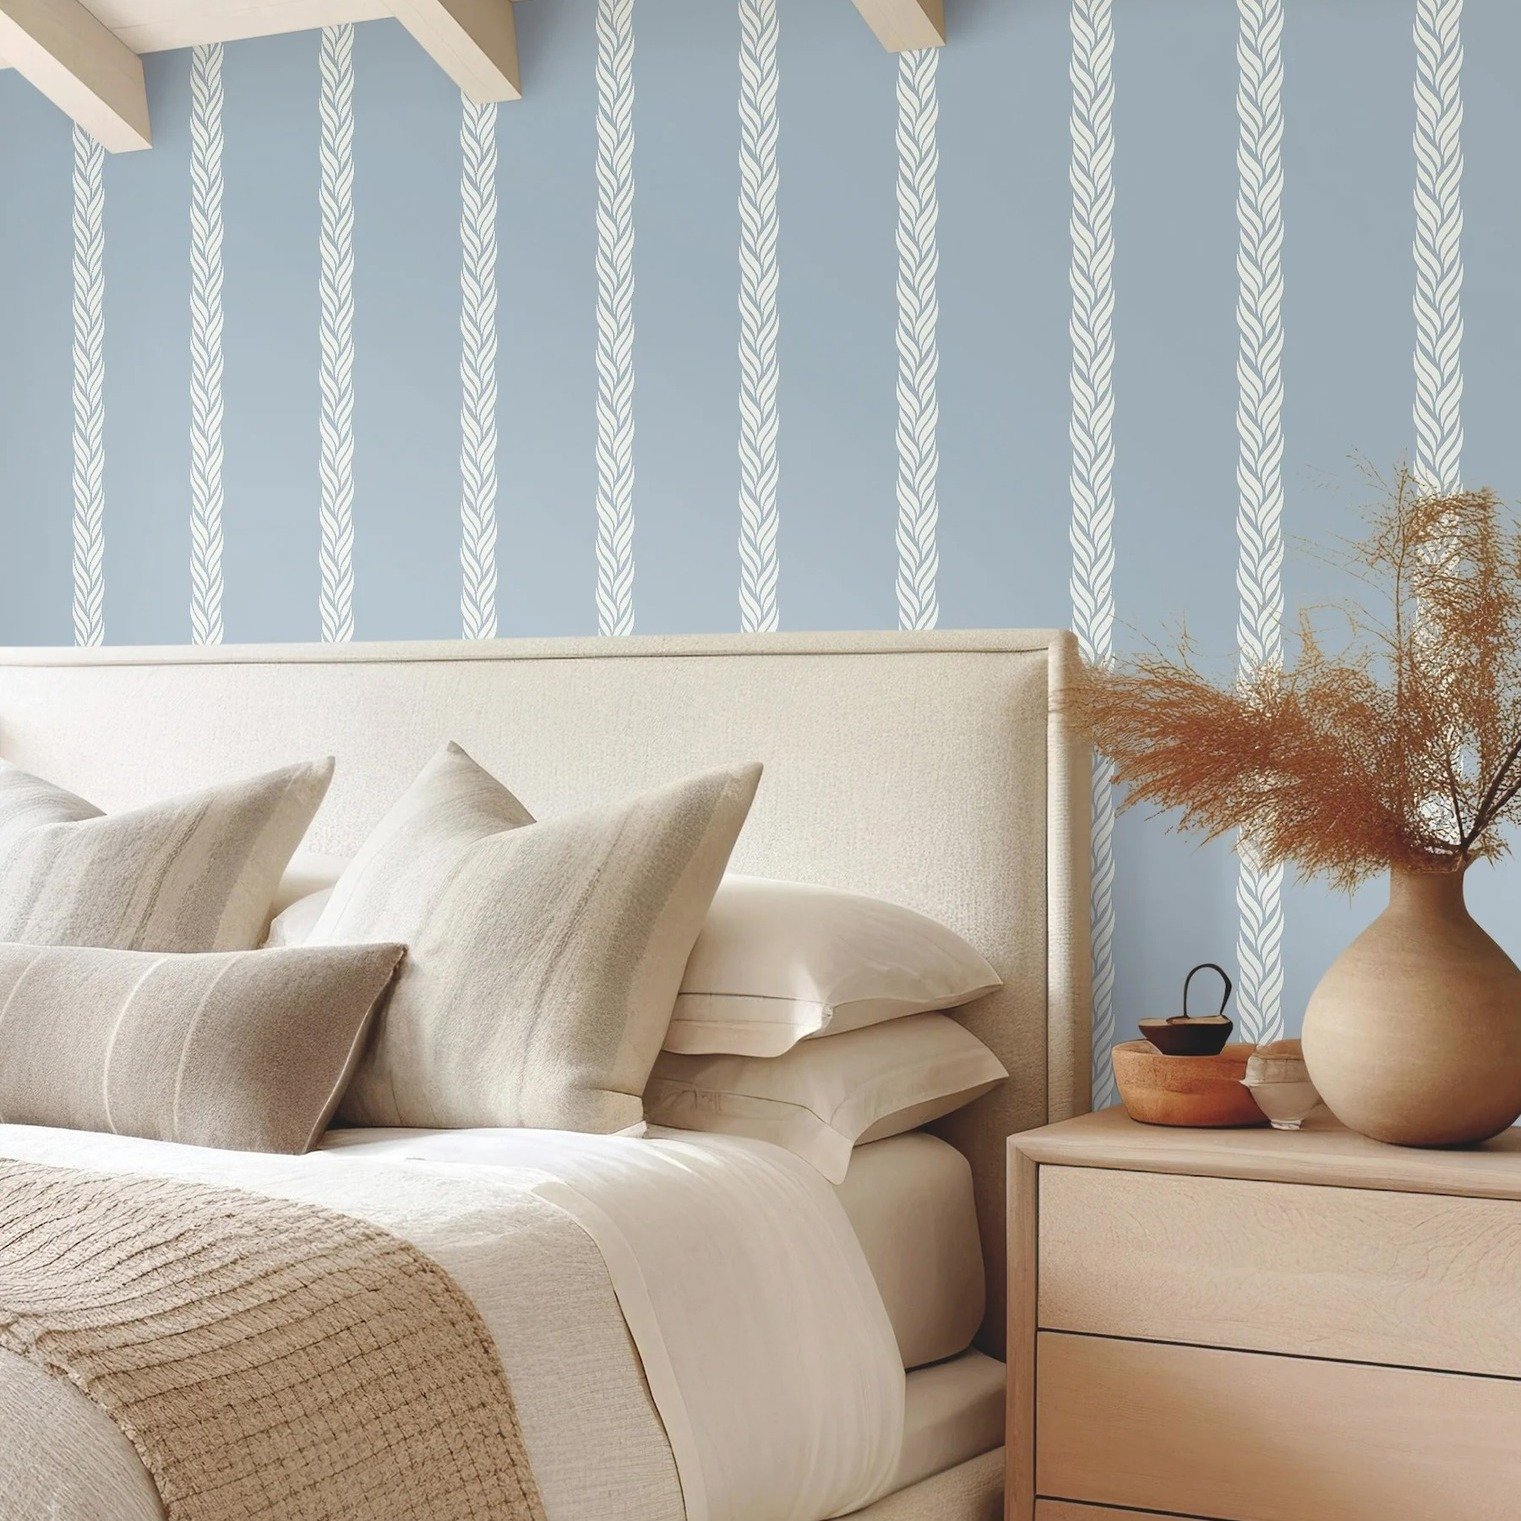 There's something really fun about this Braided Stripe wallpaper from the Ronald Redding Classics book. #wallpaper #justwallpaper #geometricpatterns #stripedwallpaper